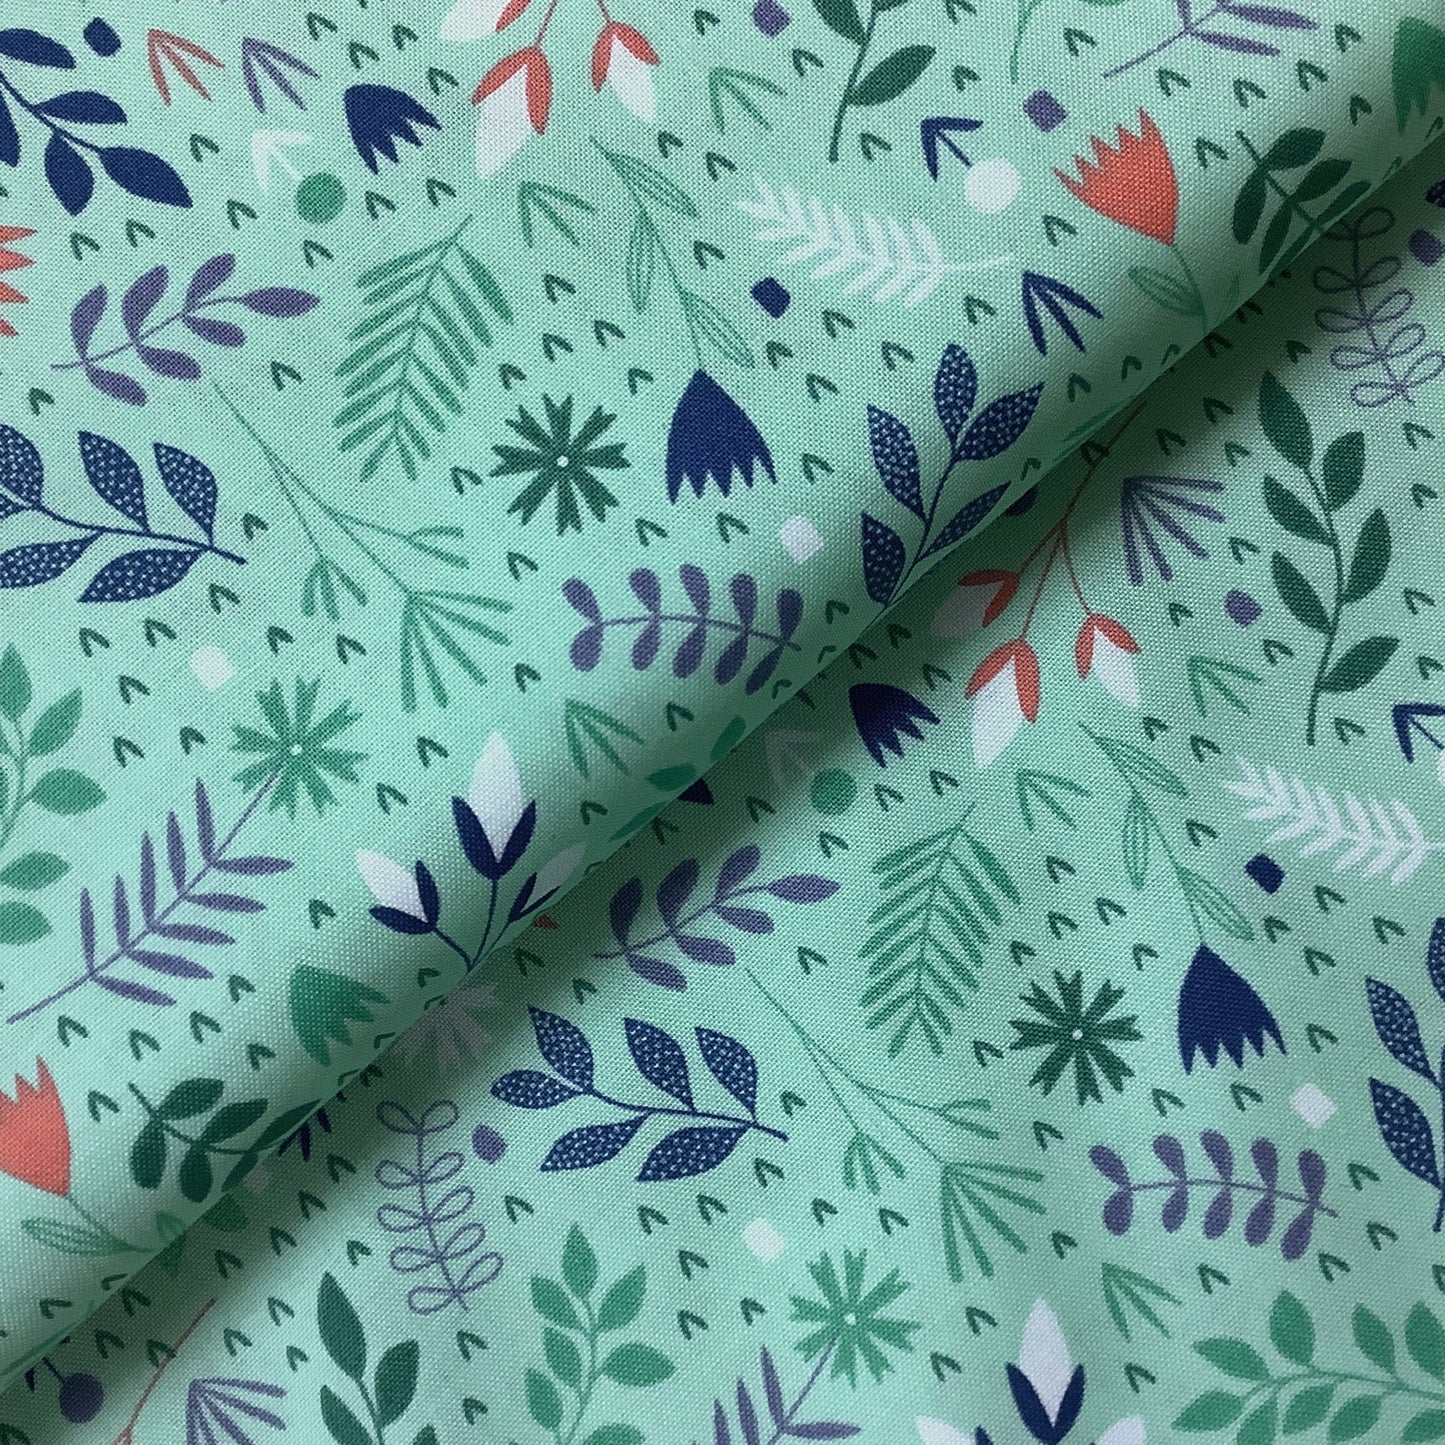 Andover Green with Leaves and Flowers 100% Premium Cotton Fabric 8376